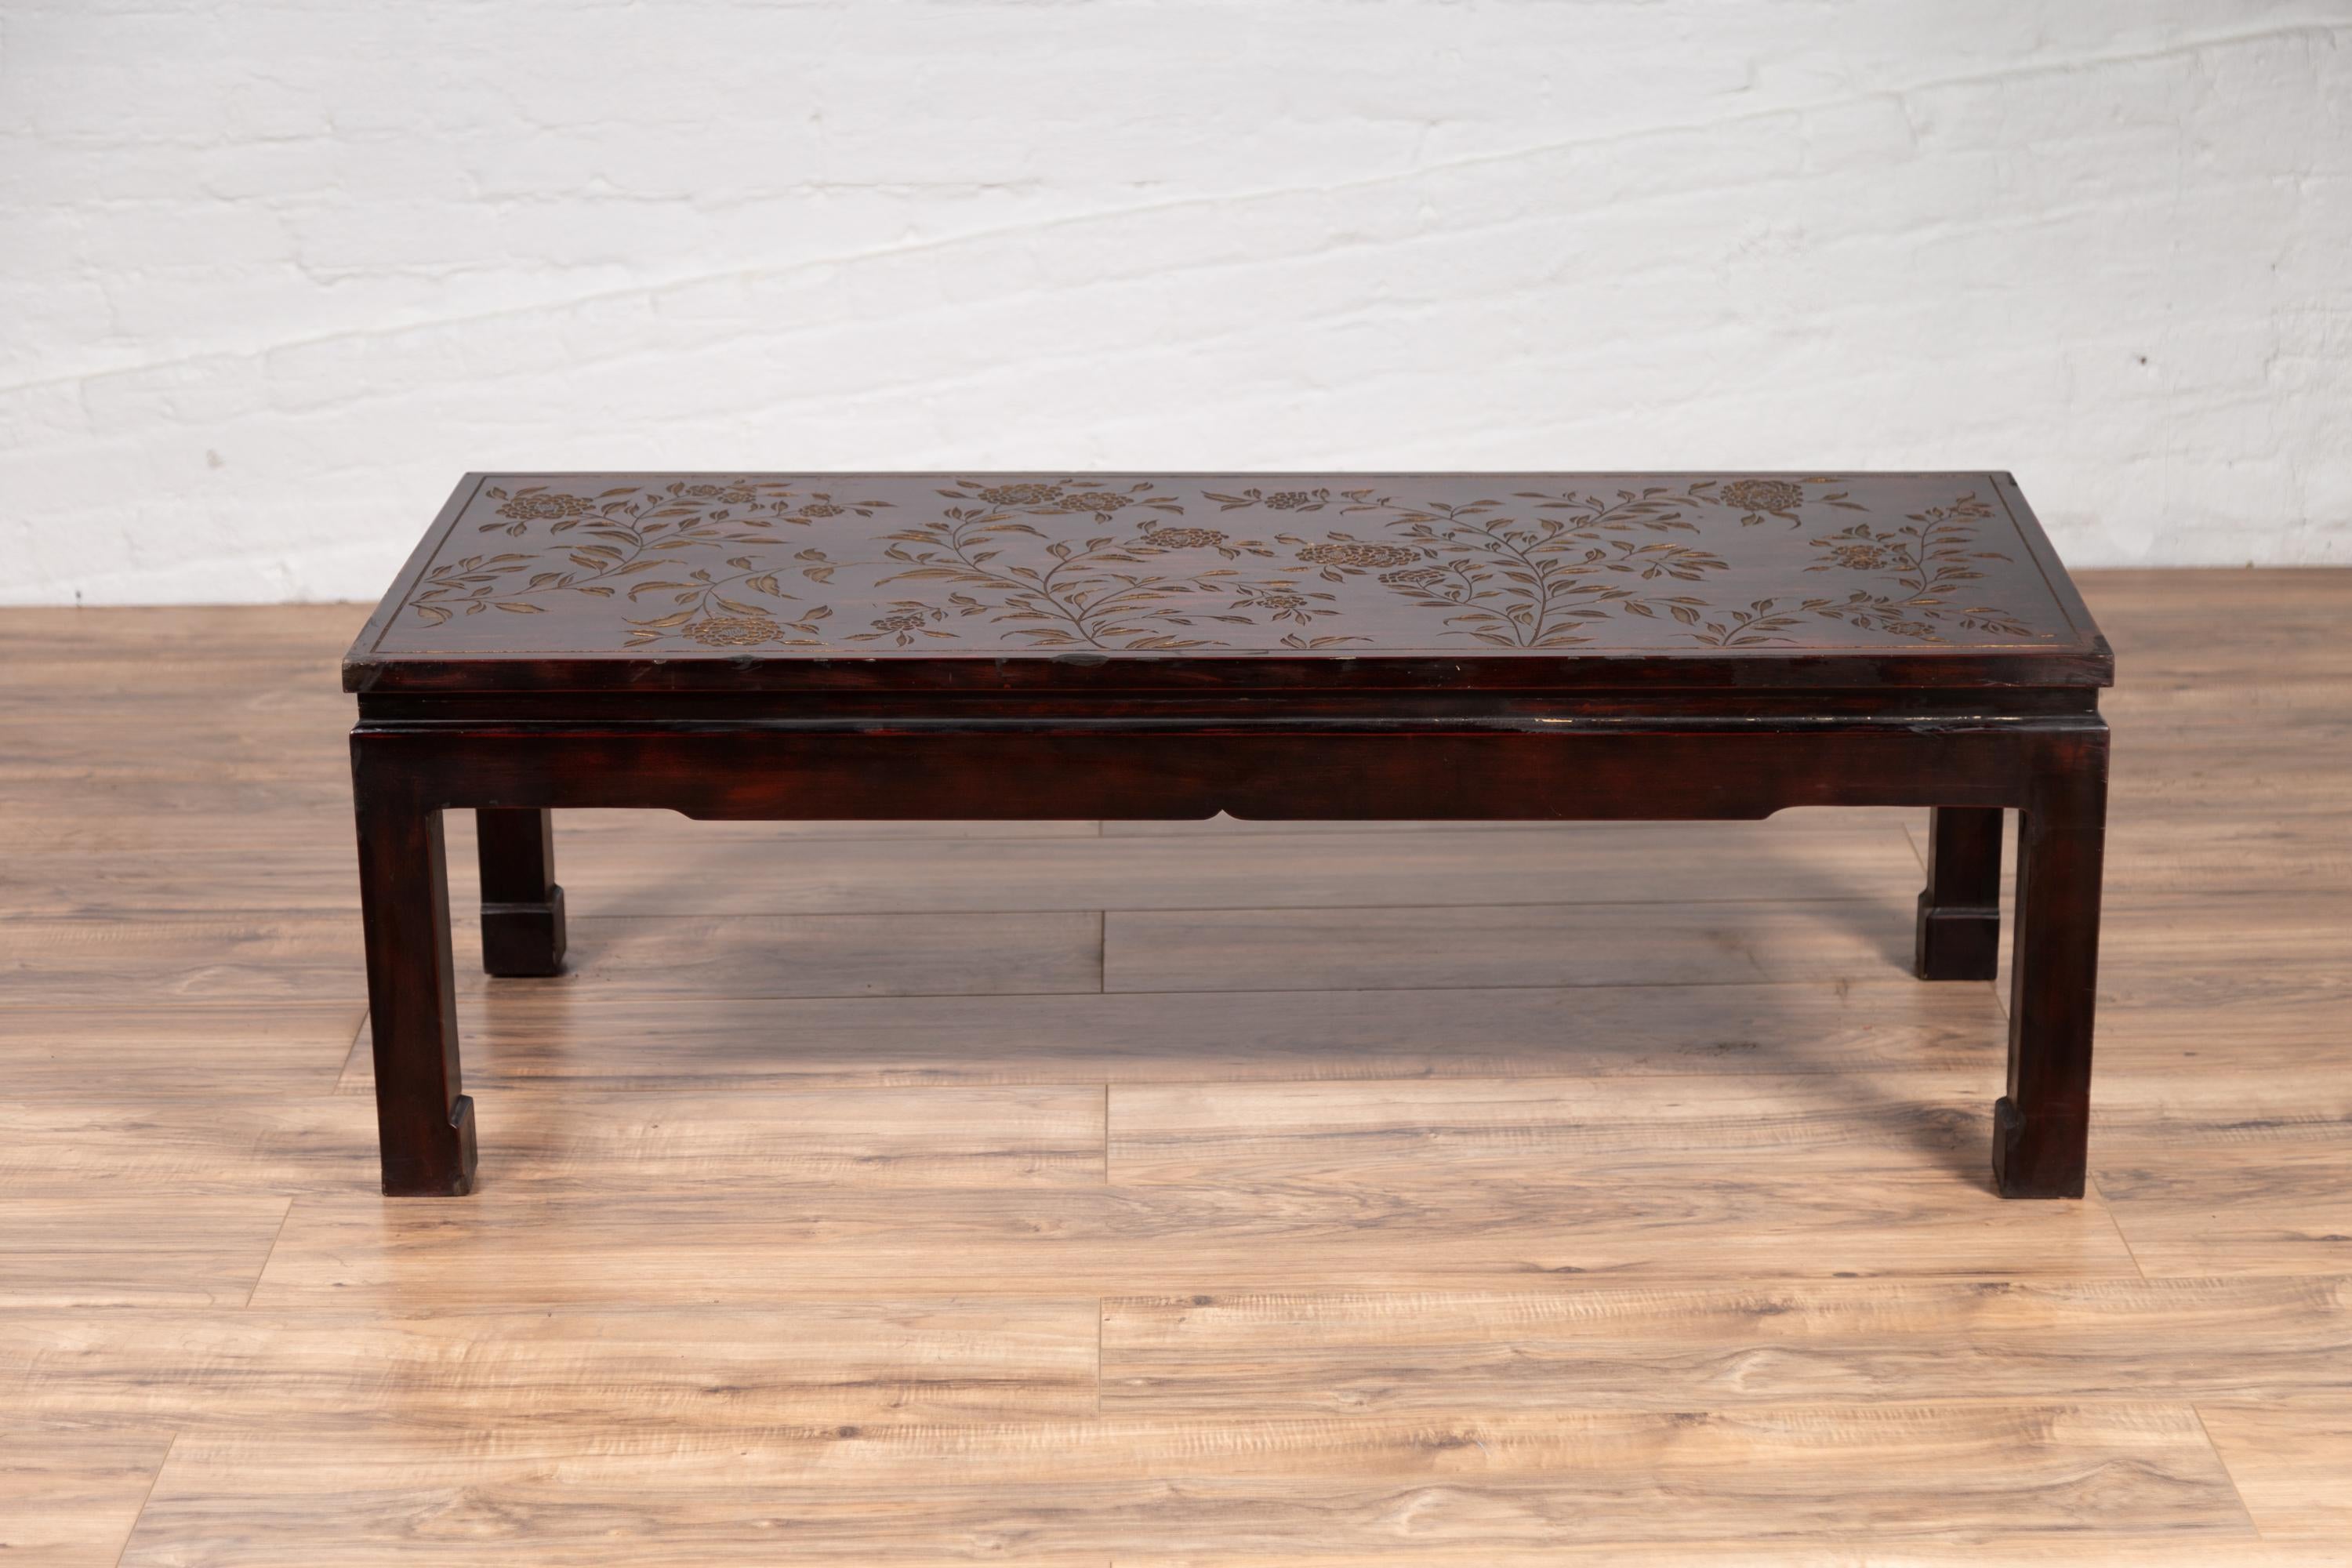 20th Century Vintage Chinese Lacquered Coffee Table with Carved and Gilt Floral Décor For Sale